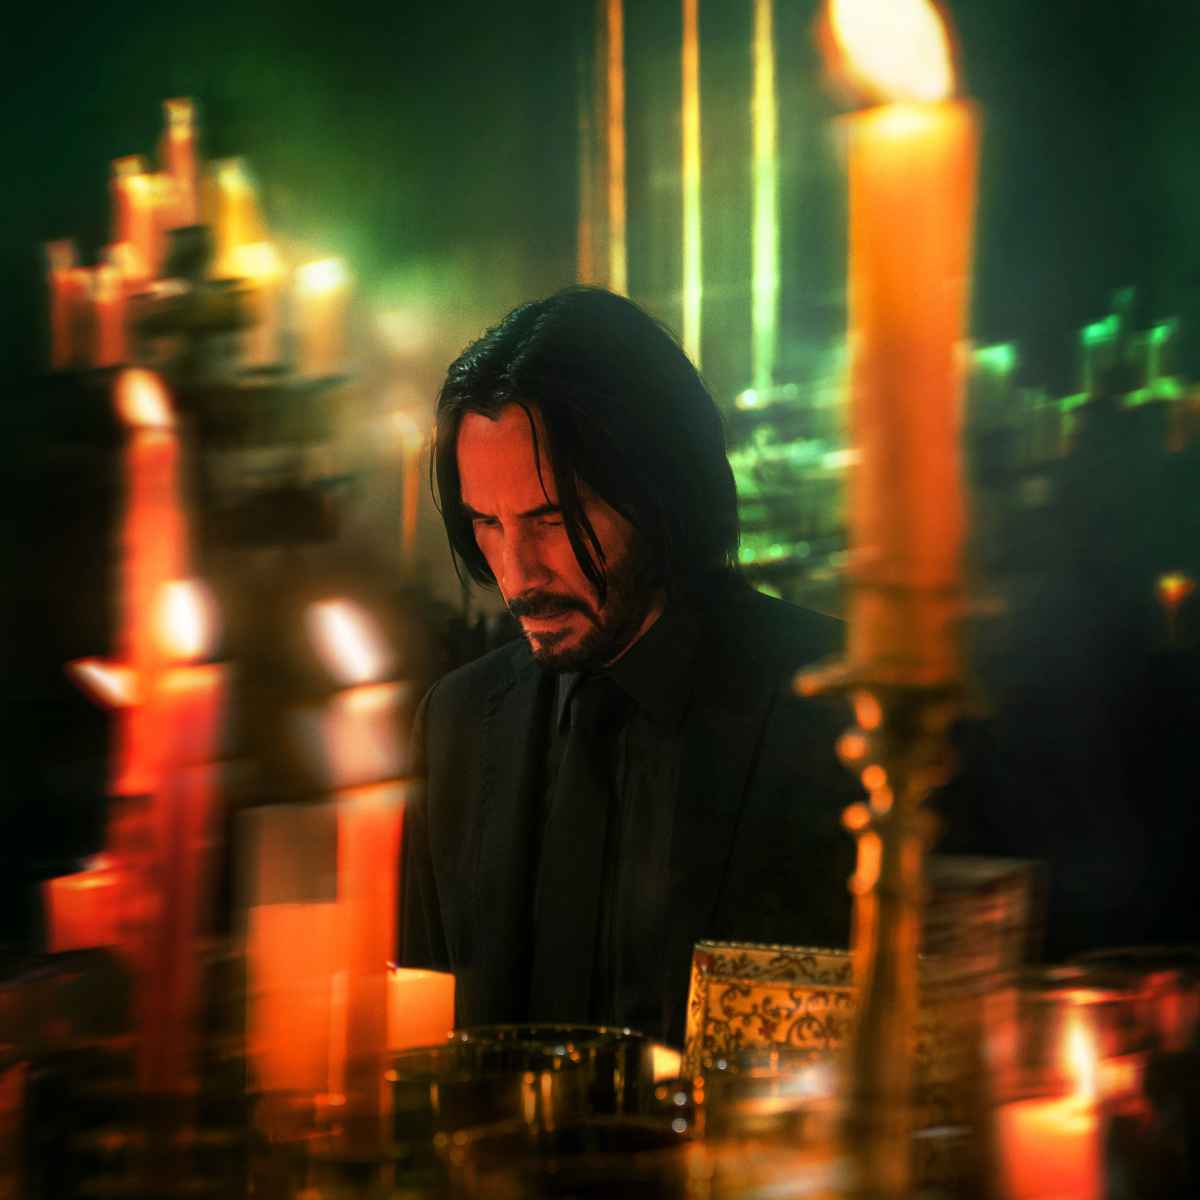 John Wick: Chapter 4 Trailer and Posters!